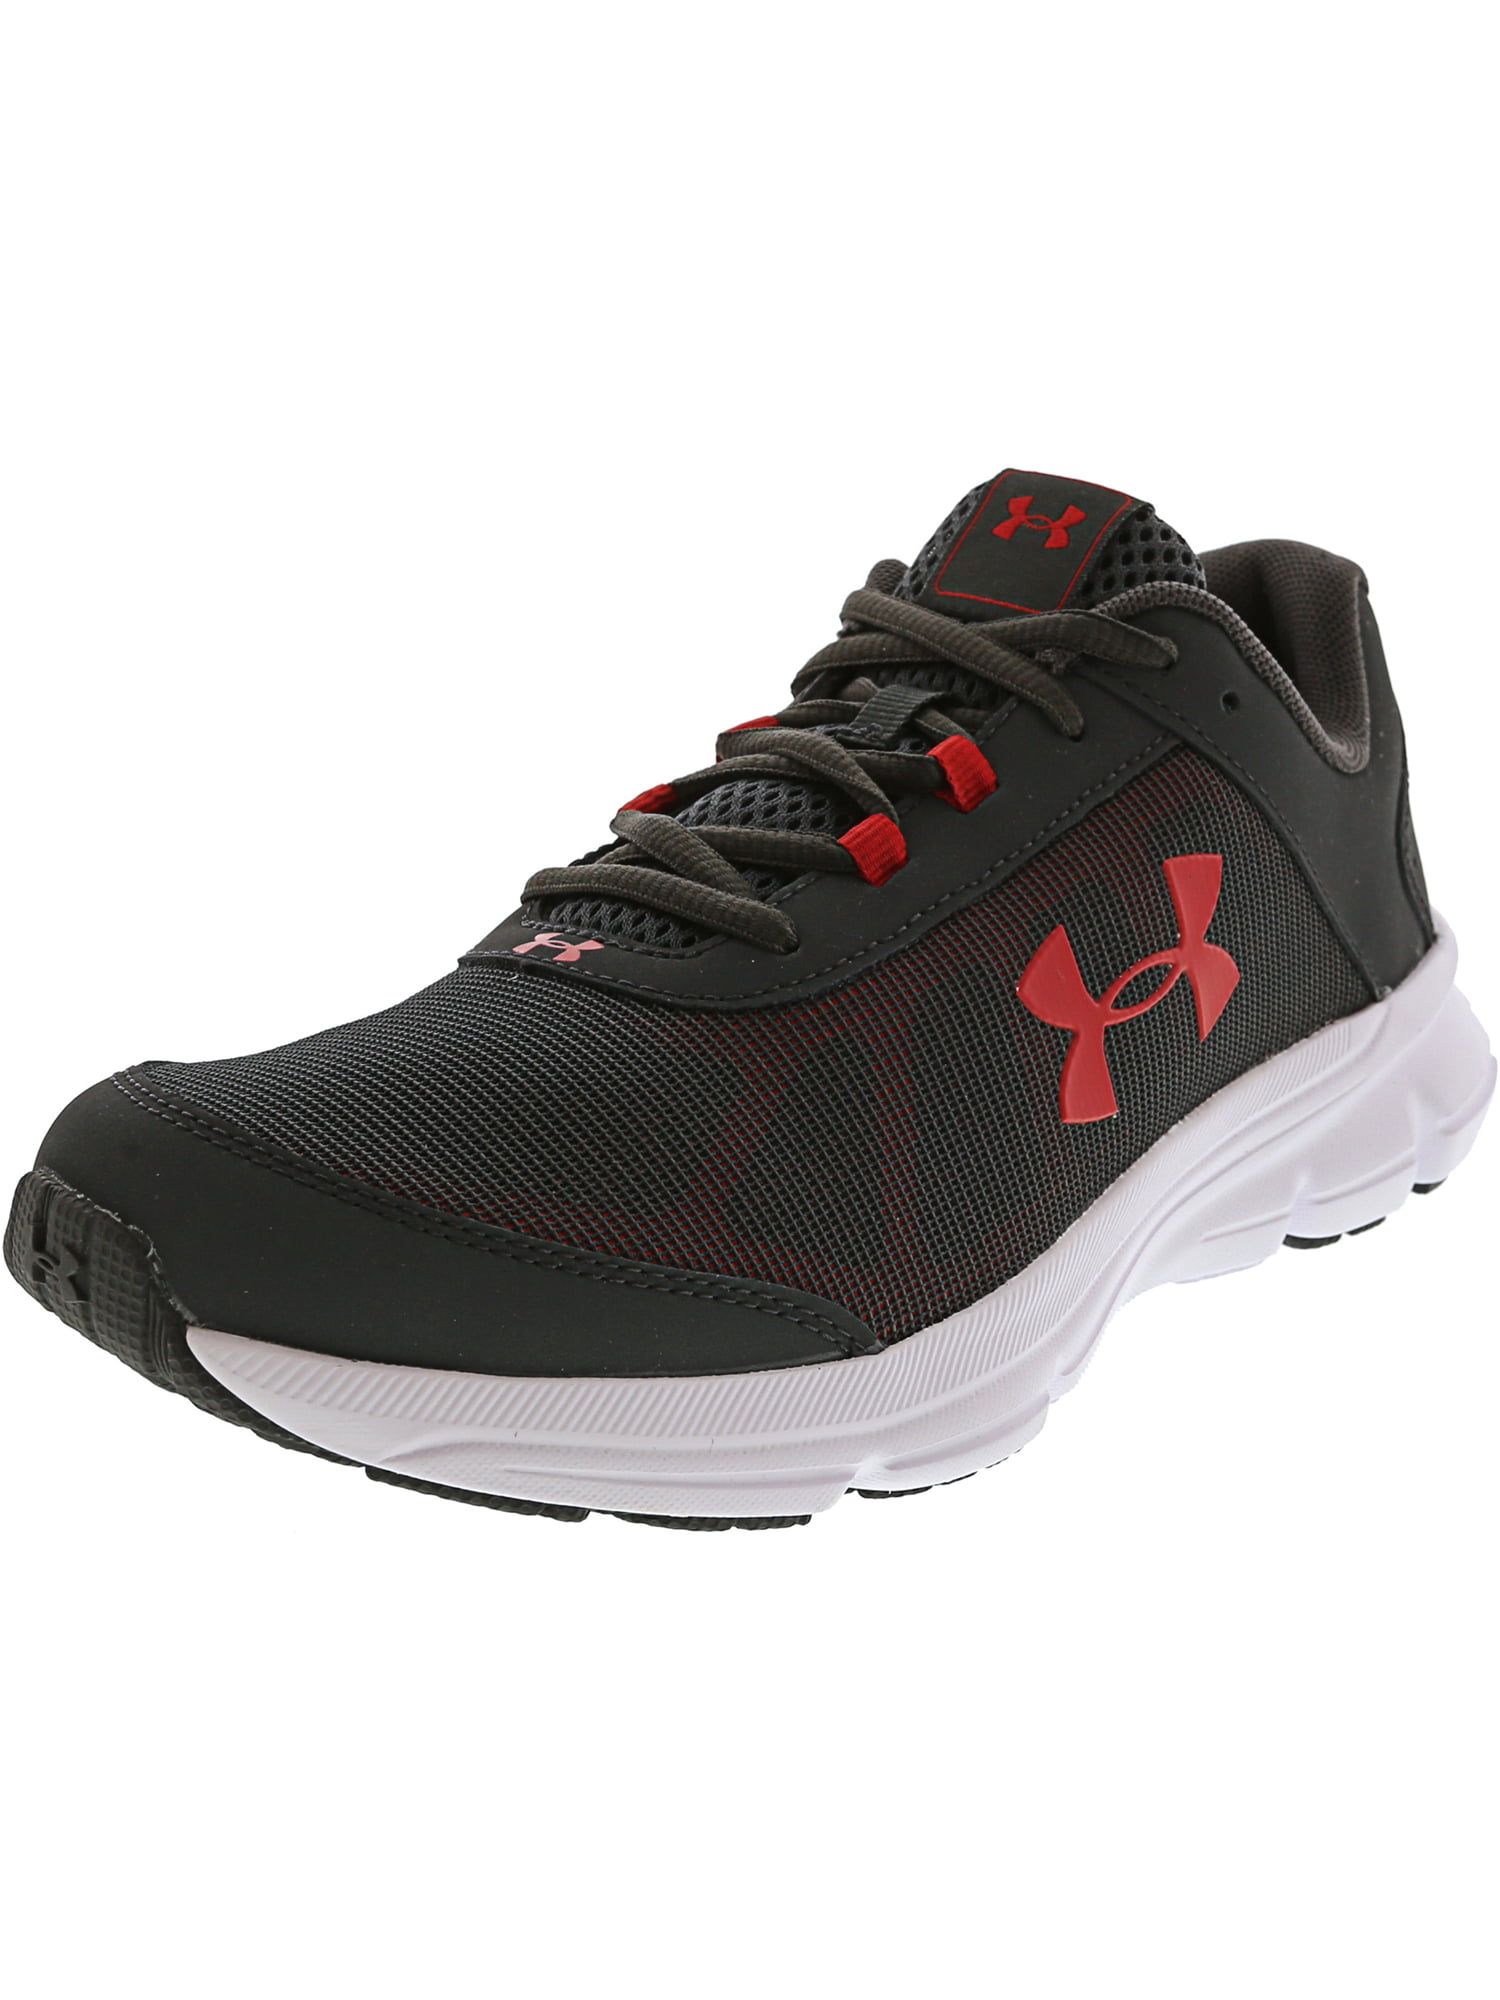 Under Armour Bgs Rave 2 Grey Ankle-High 